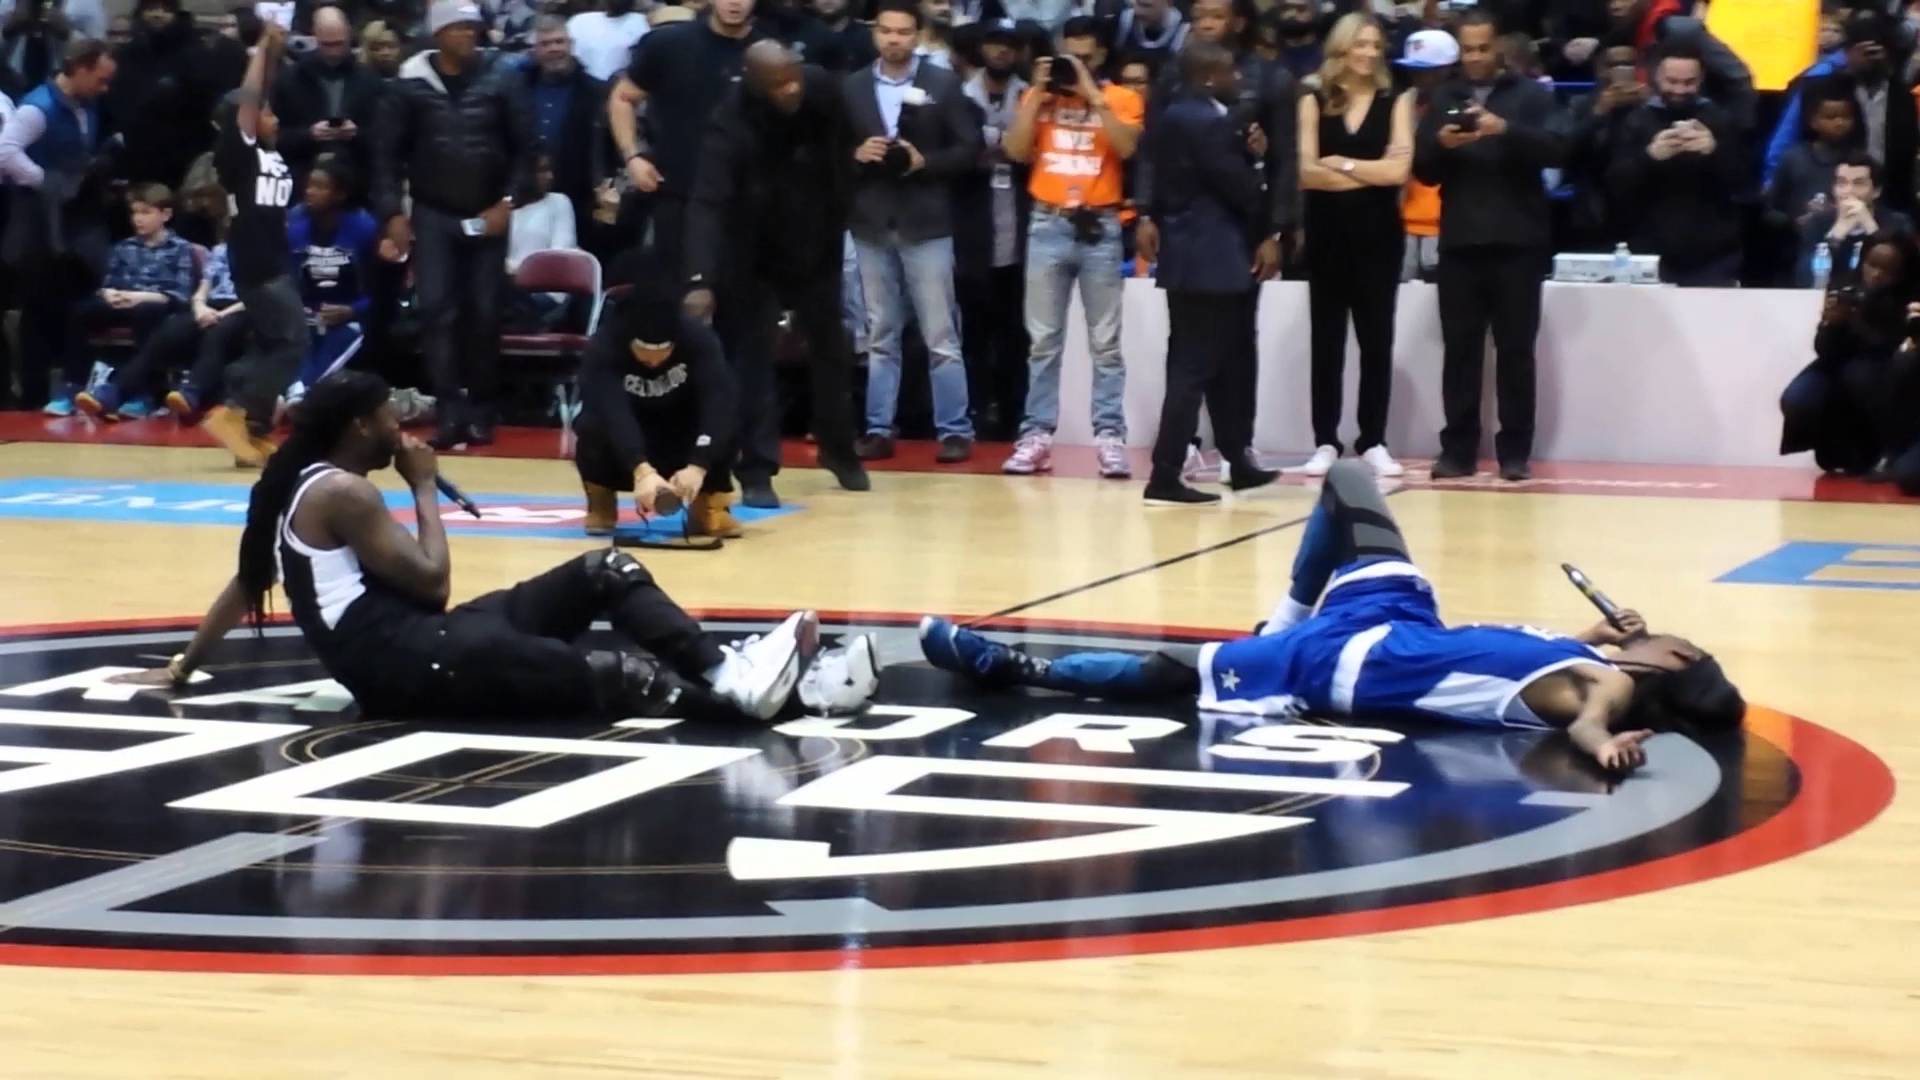 Snoop Dogg & 2 Chainz took a center court rest mid-game for scoreboard controversy